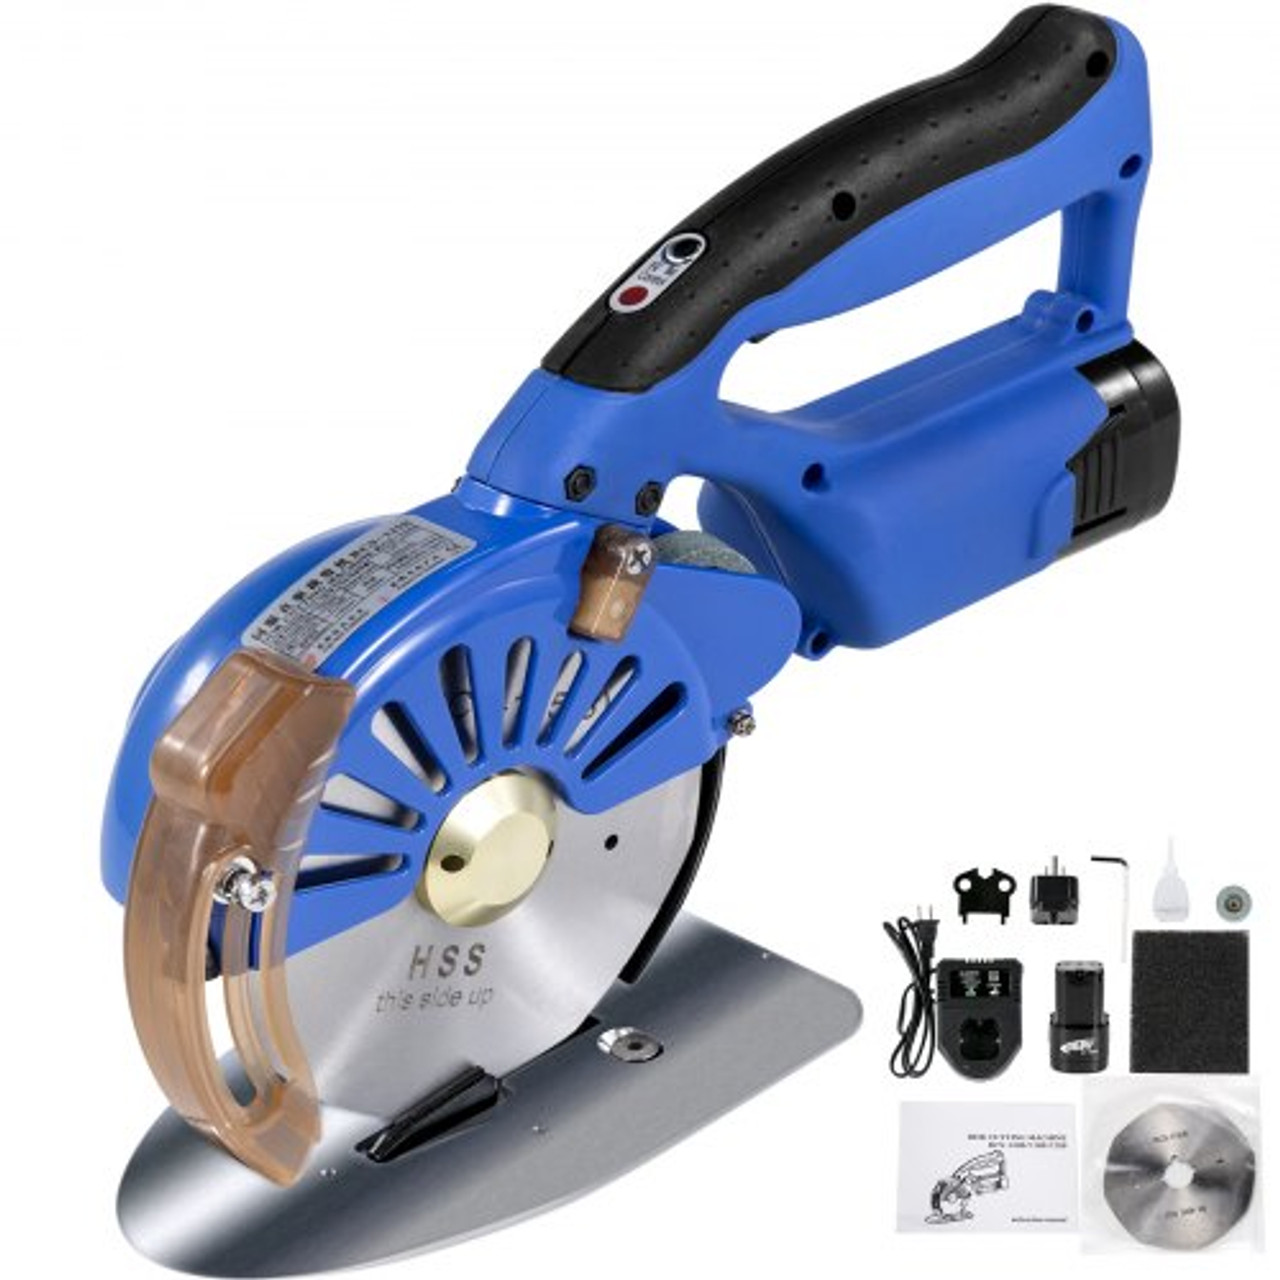 VEVOR Fabric Cutter 125mm Rotary Fabric Cutter 39mm Cutting Height Wireless Electric Rotary Cutter All-Copper Motor with Low Noise Adjustable Speed